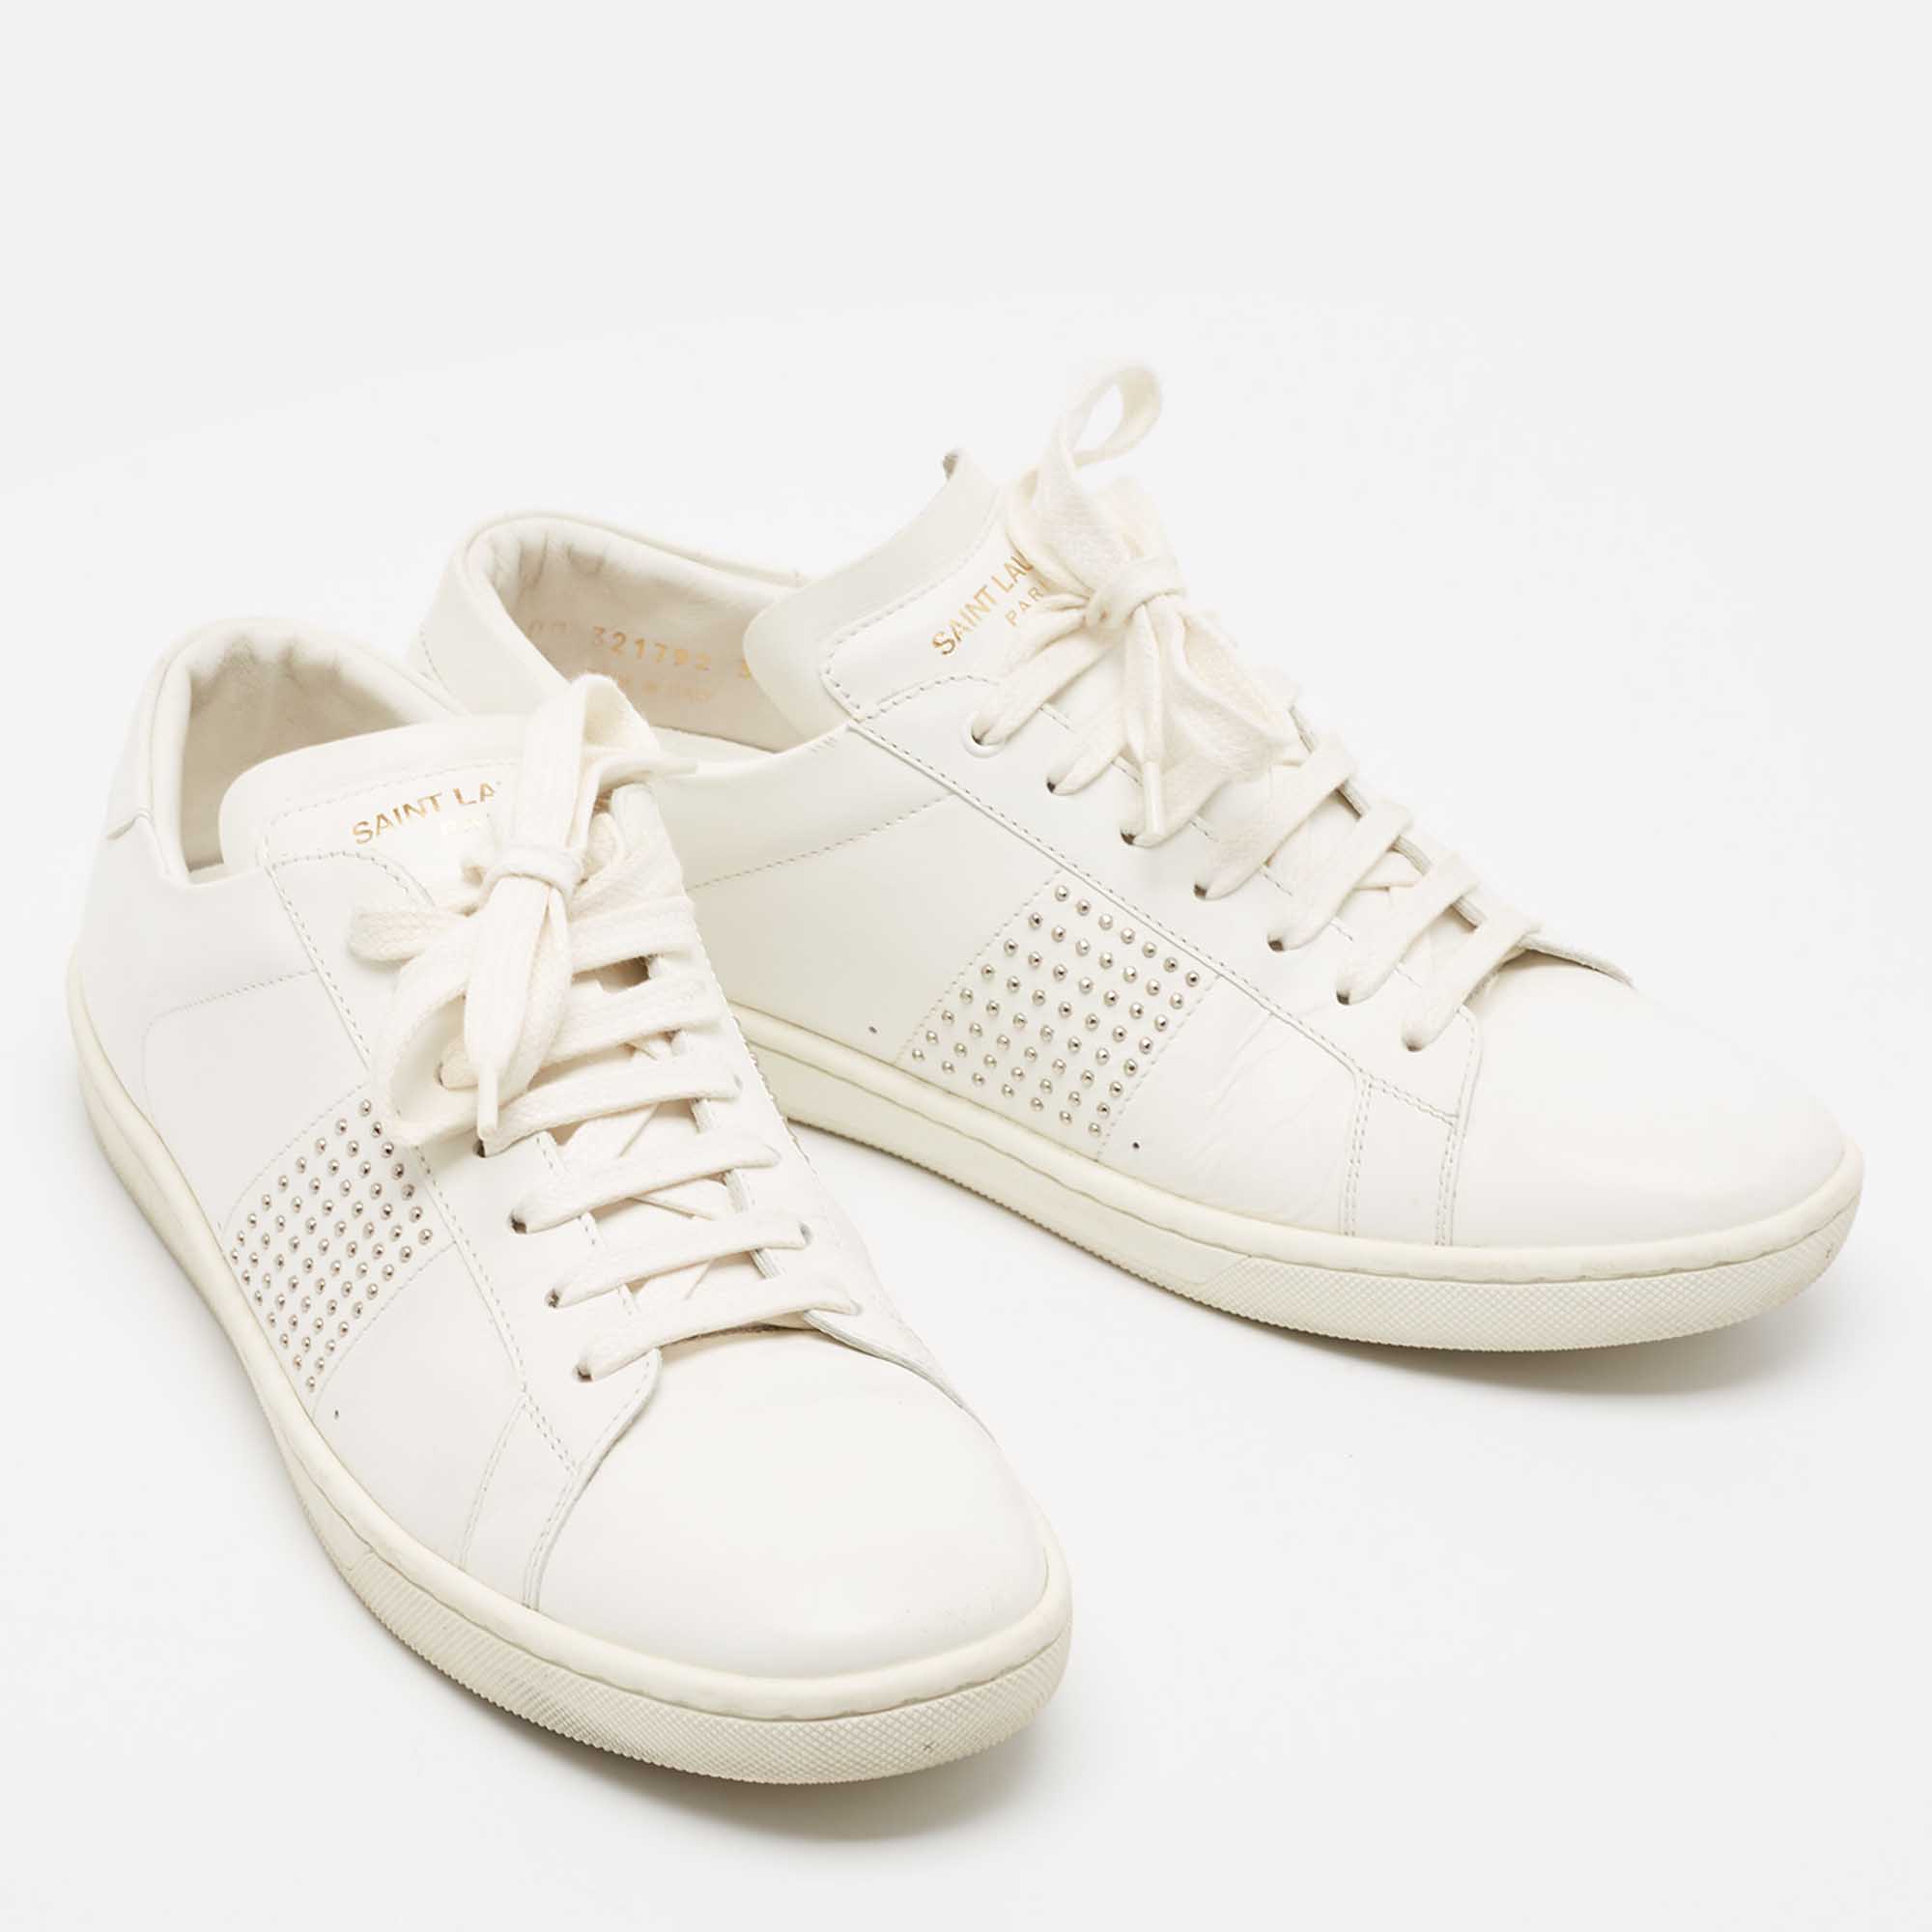 Saint Laurent White Leather Crystal Embellished Low Top Sneakers Size 39